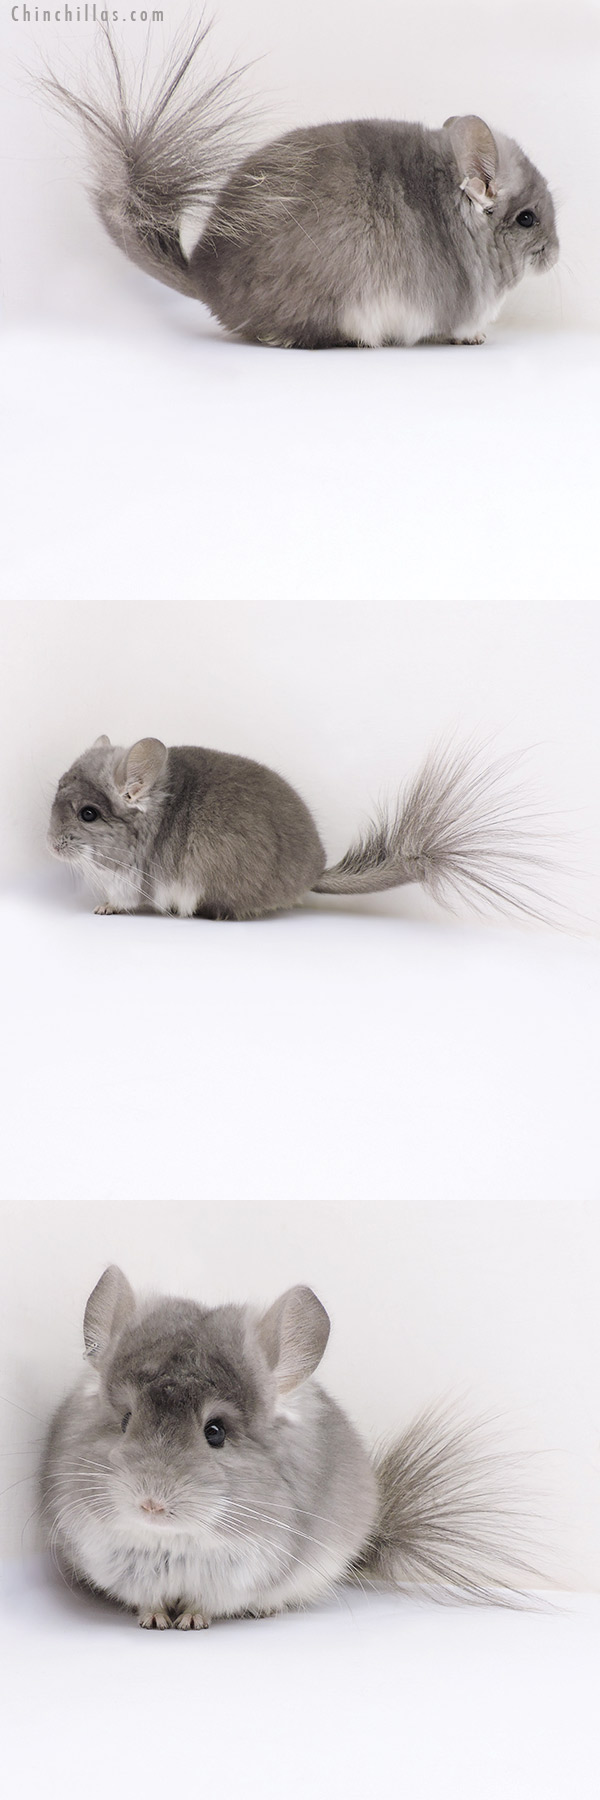 Chinchilla or related item offered for sale or export on Chinchillas.com - 17393 Exceptional Blocky Violet  Royal Persian Angora Male Chinchilla